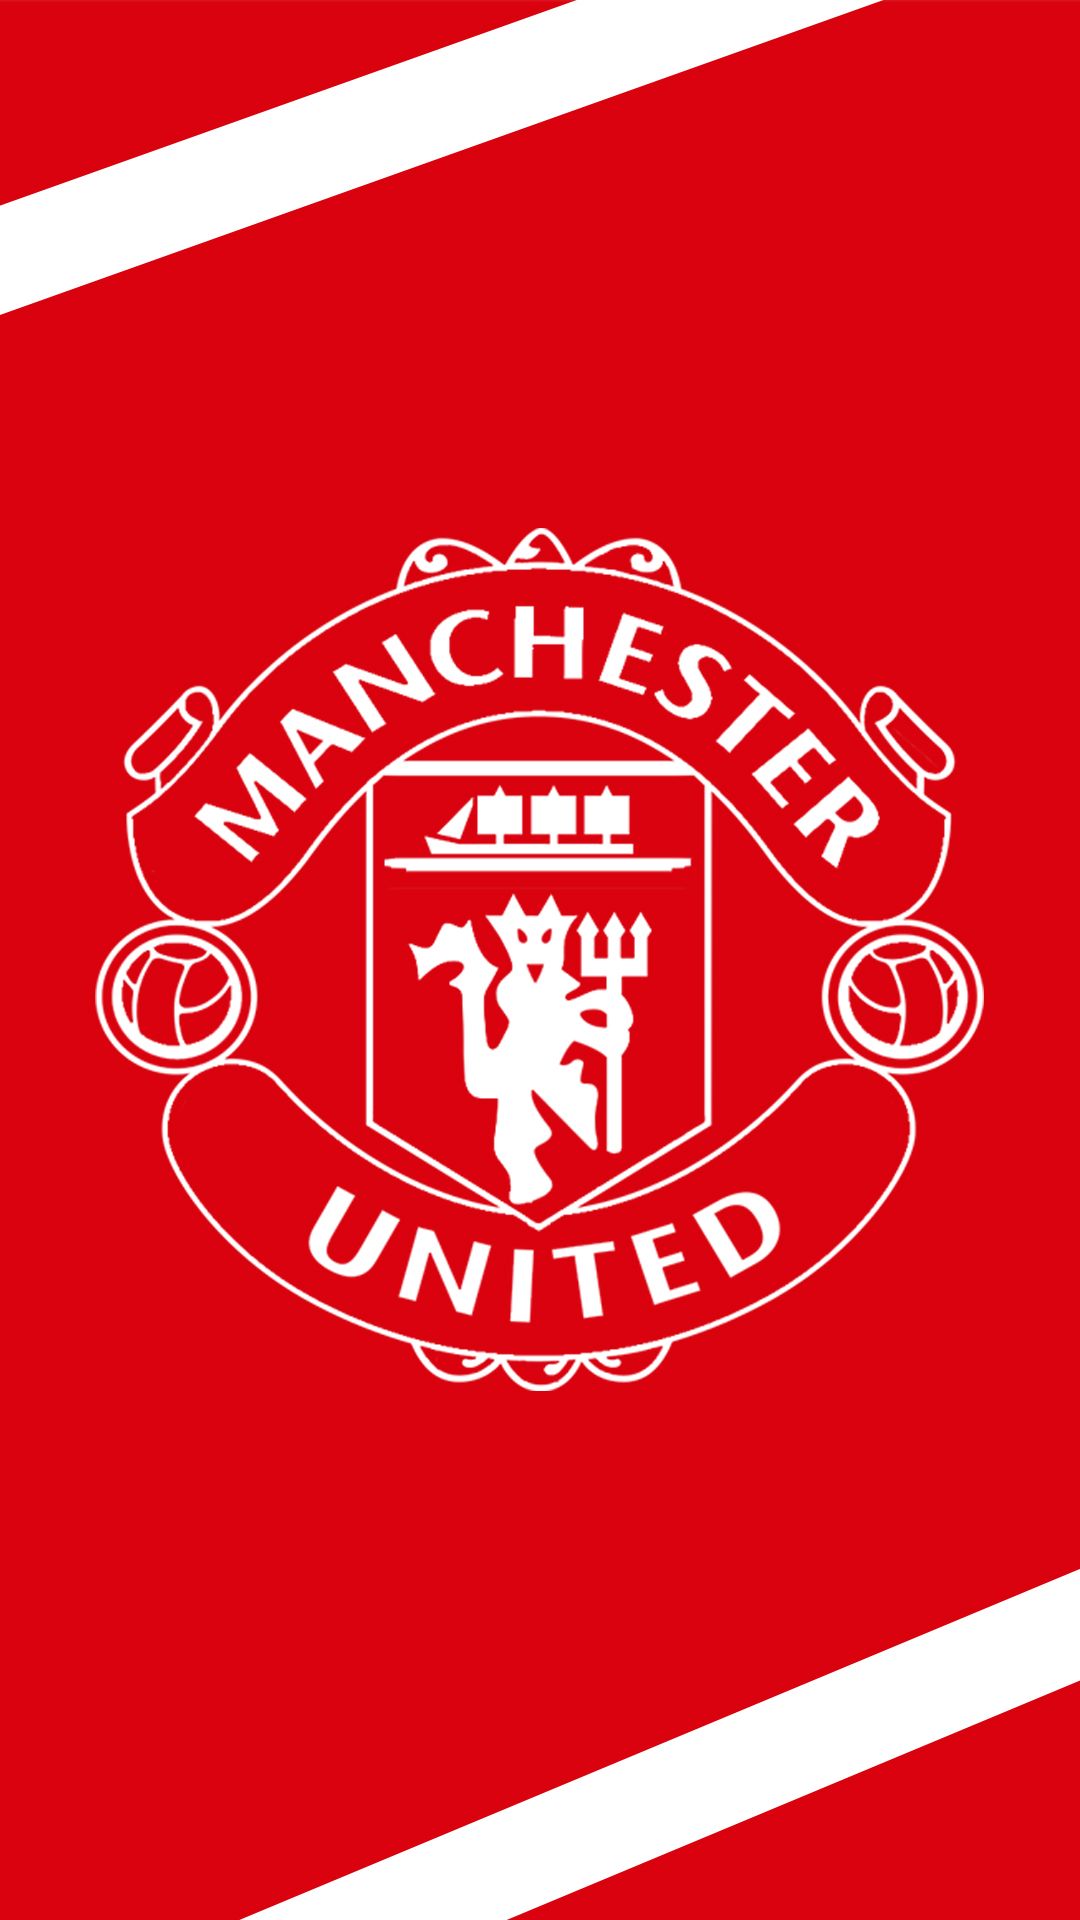 Flatpaper  Download your free personalized HD wallpaper now at  httpswwwflpaperscomwallpapermanchesterunitedwallpaperhd We shall  RISE again Manchester United This week is Flpapers EPL week champs  Celebrate and support Manchester United 